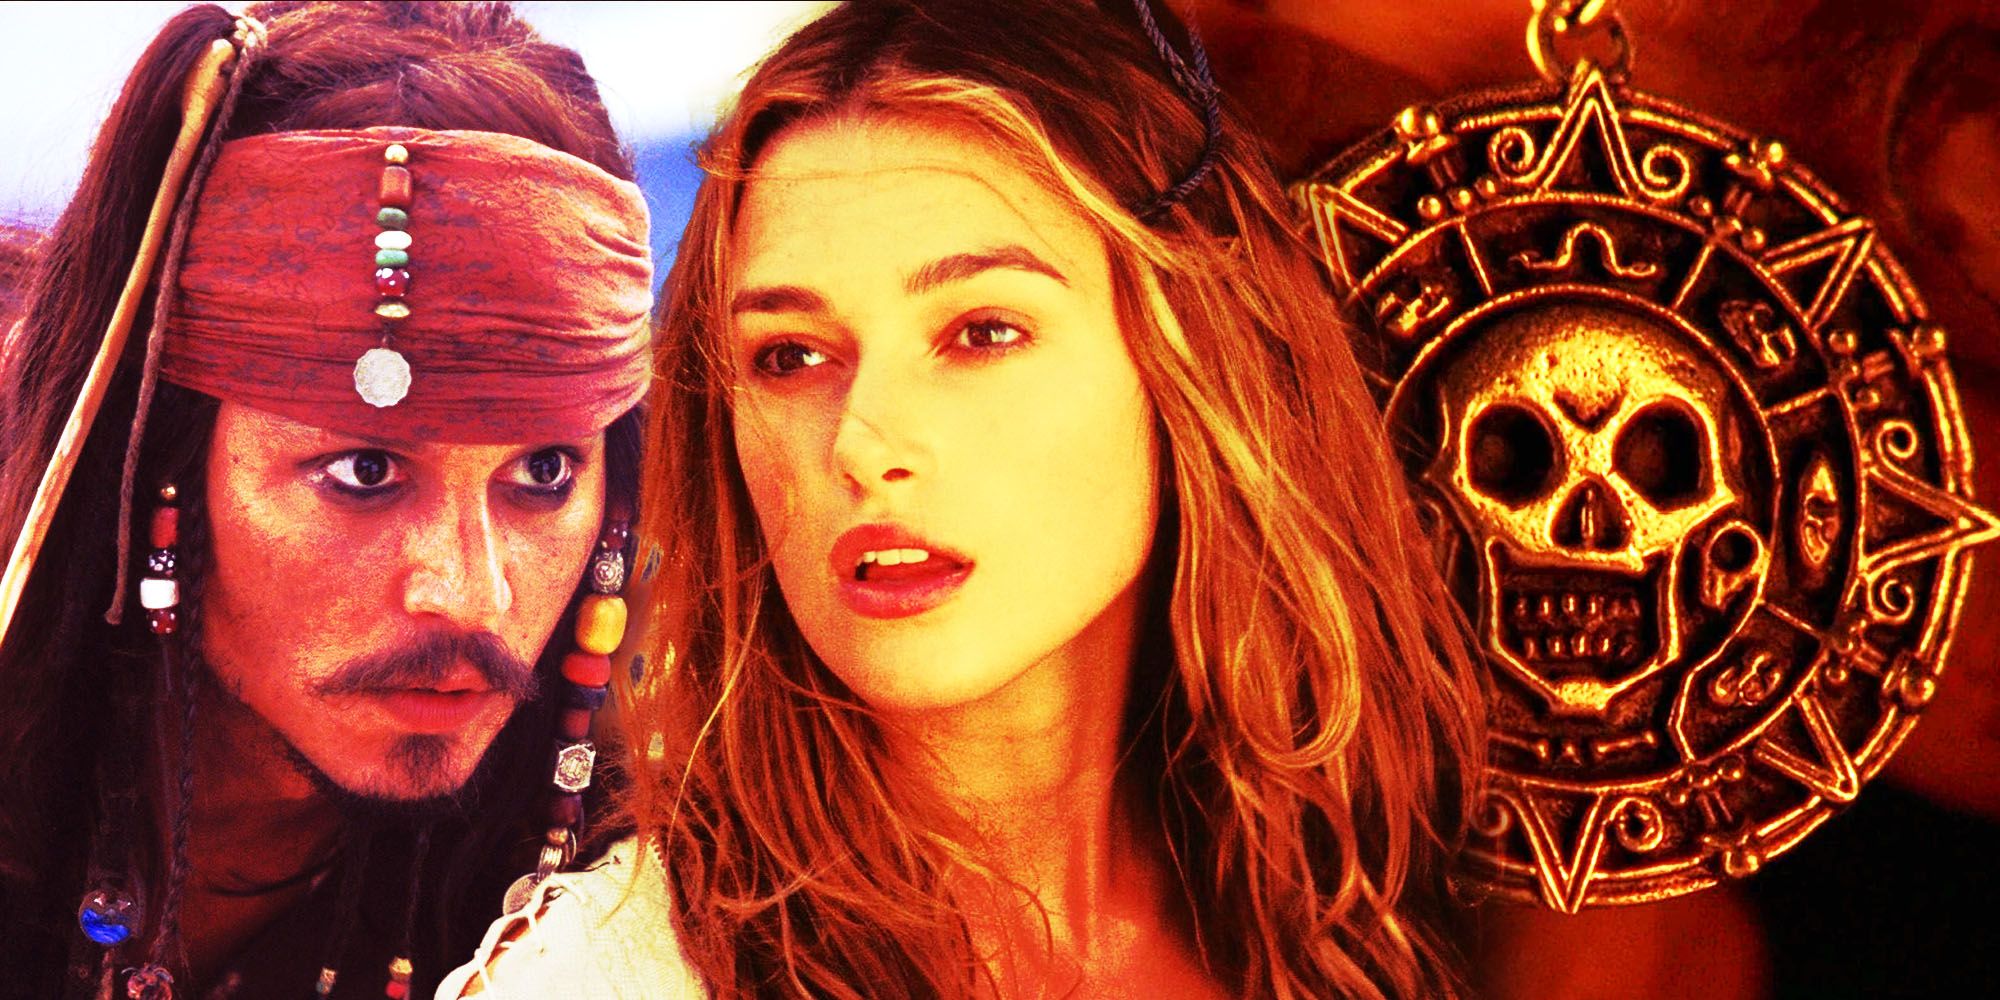 Johnny Depp as Jack Sparrow Keira Knightley as Elizabeth Swann and Aztec gold in Pirates of the Caribbean